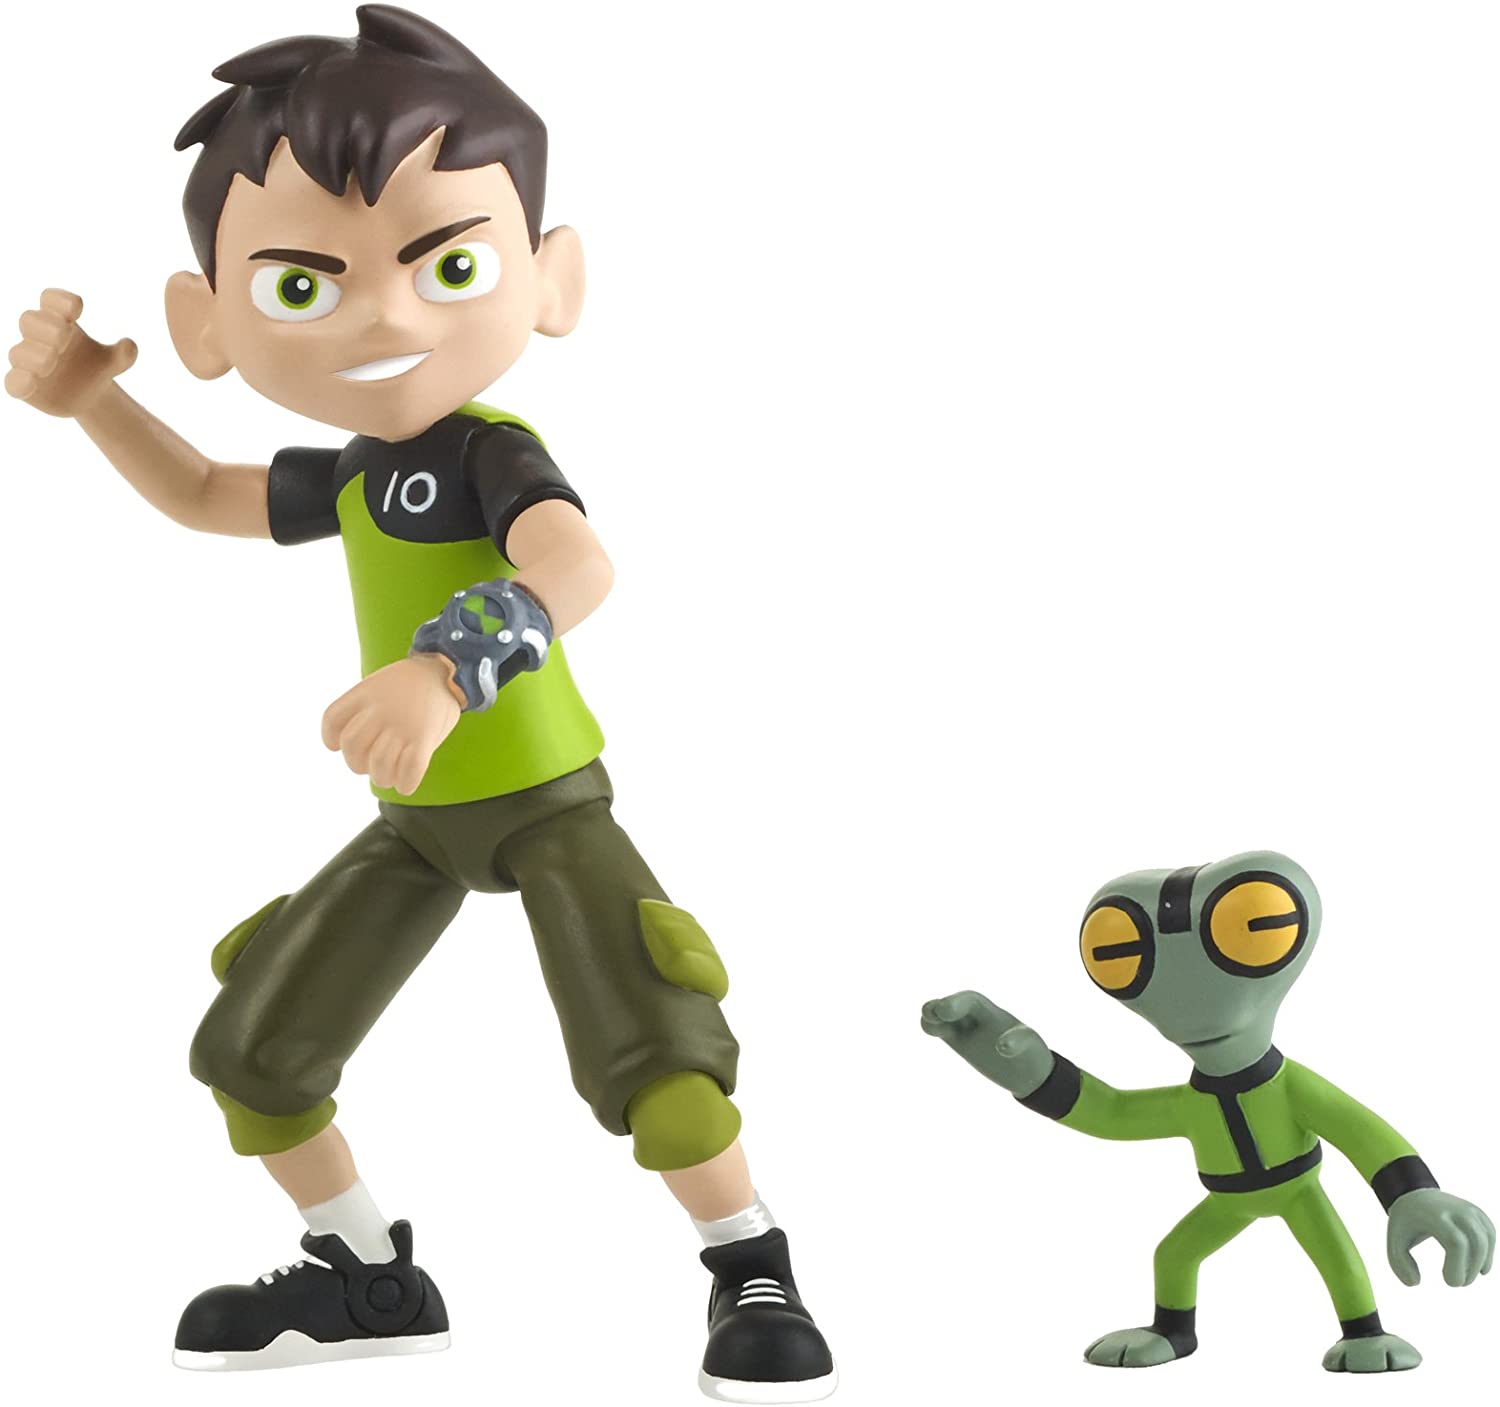 Ben 10 Ben & Grey Matter Action Figure, Ben uses the power of the Omnitrix to help others and stop the bad guys but isn't above a little Super powered mischief now